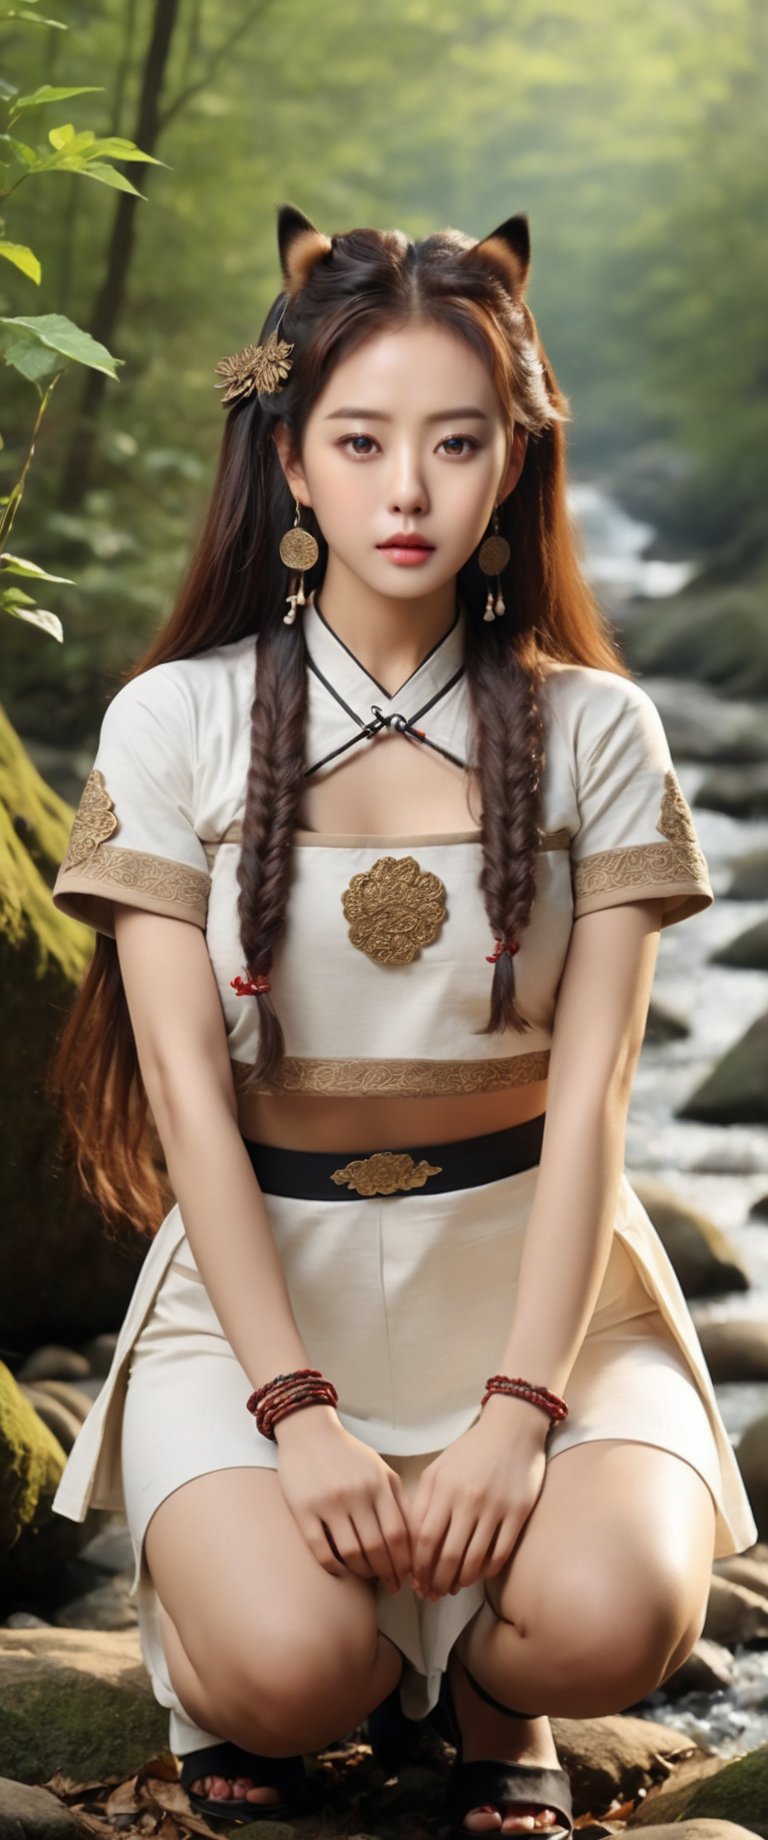 (korean Warrior), (Female), (Fantasy  Setting), | (Kneeling on the forest floor at a creek), | (FULL BODY Generation!!!), | (Insane clothing details), (Beautiful furry Outfit), (aesthetic style), (Choker), (Earings), (High Heels), (Stockings), (hair accessoires), | (Long beautiful hair), (interesting hair style), (Beautiful Face), (shiny Eyes), (Light skin), (Human face expression), | (Kynetic body parts), (body in motion), (realistic face), (realistic limbs), (Proportionate body), (Human Anatomy), | (Complex Background), (High Resolution Image), (Cinematic), (stunning visuals), (professional composition),minsi